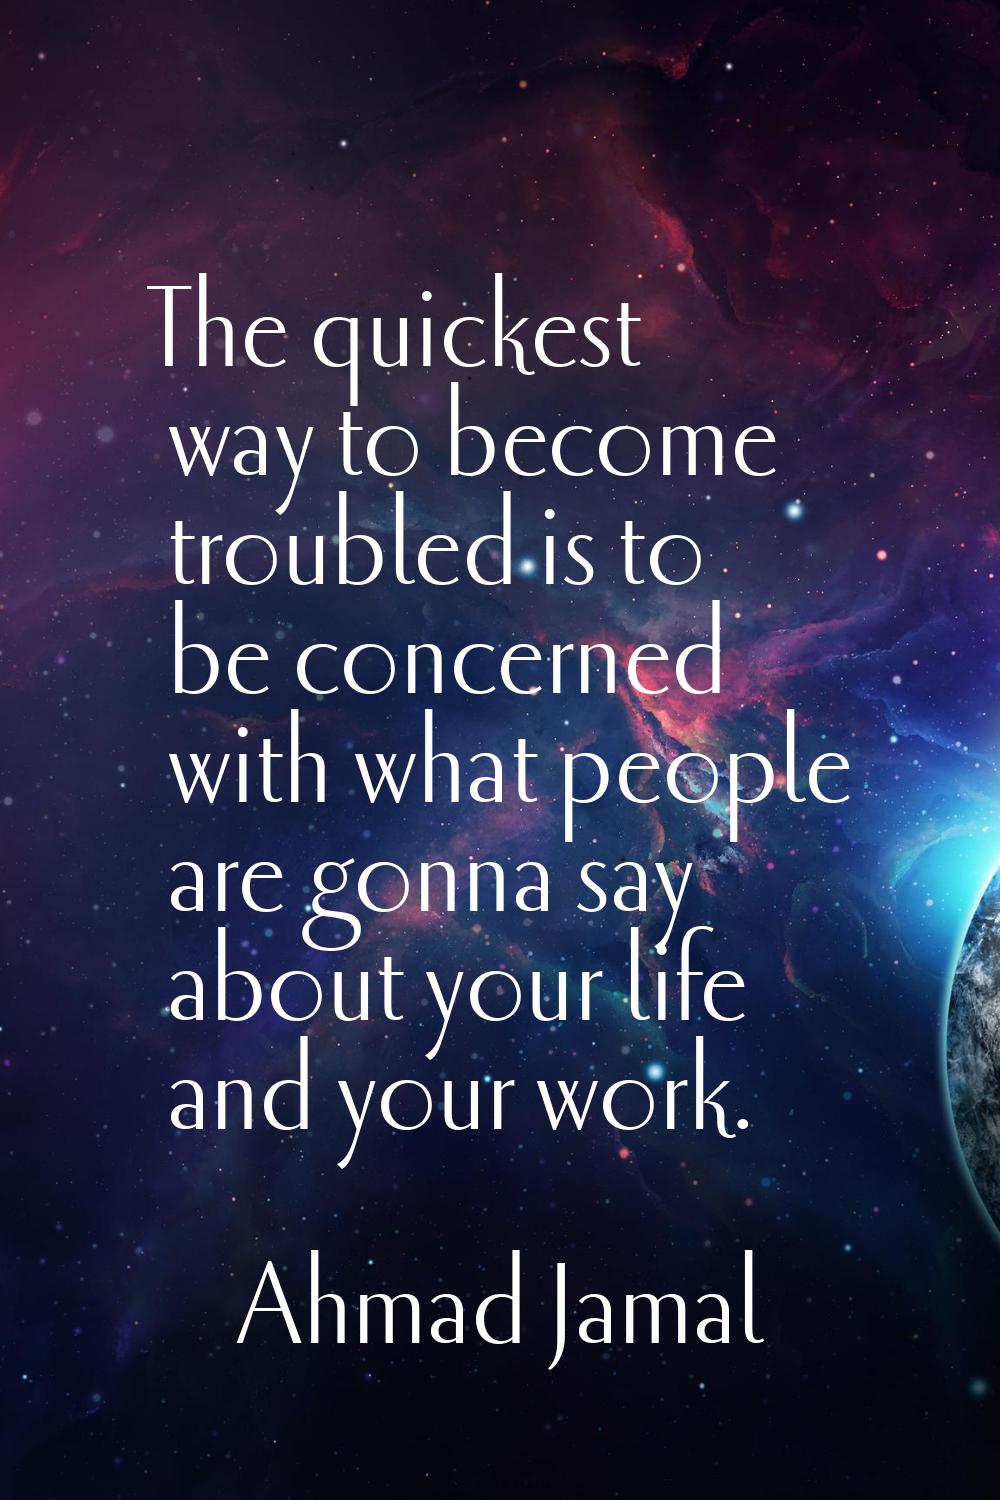 The quickest way to become troubled is to be concerned with what people are gonna say about your li